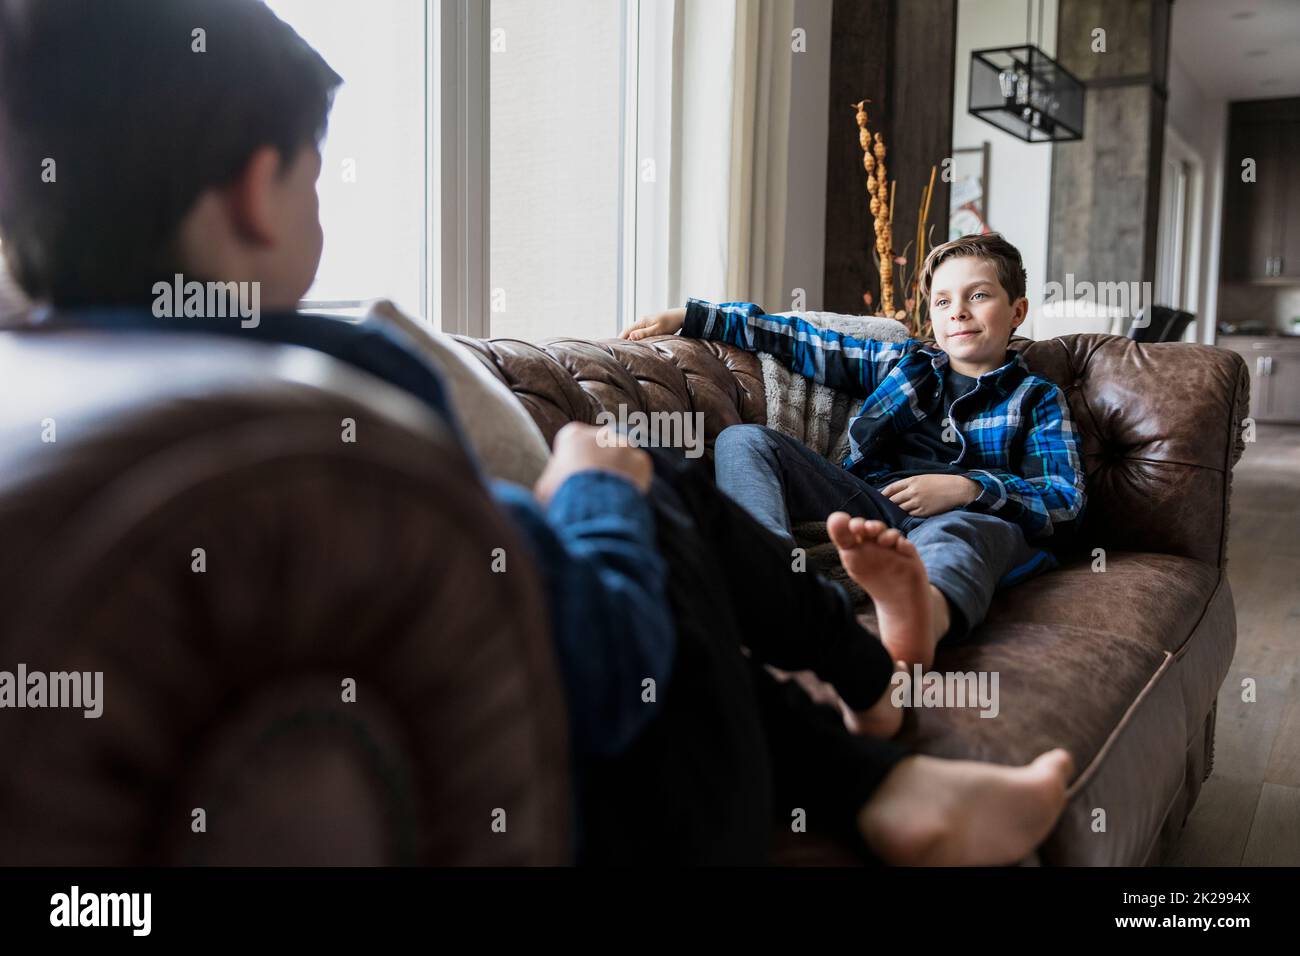 Brothers sitting on sofa looking at each other Stock Photo